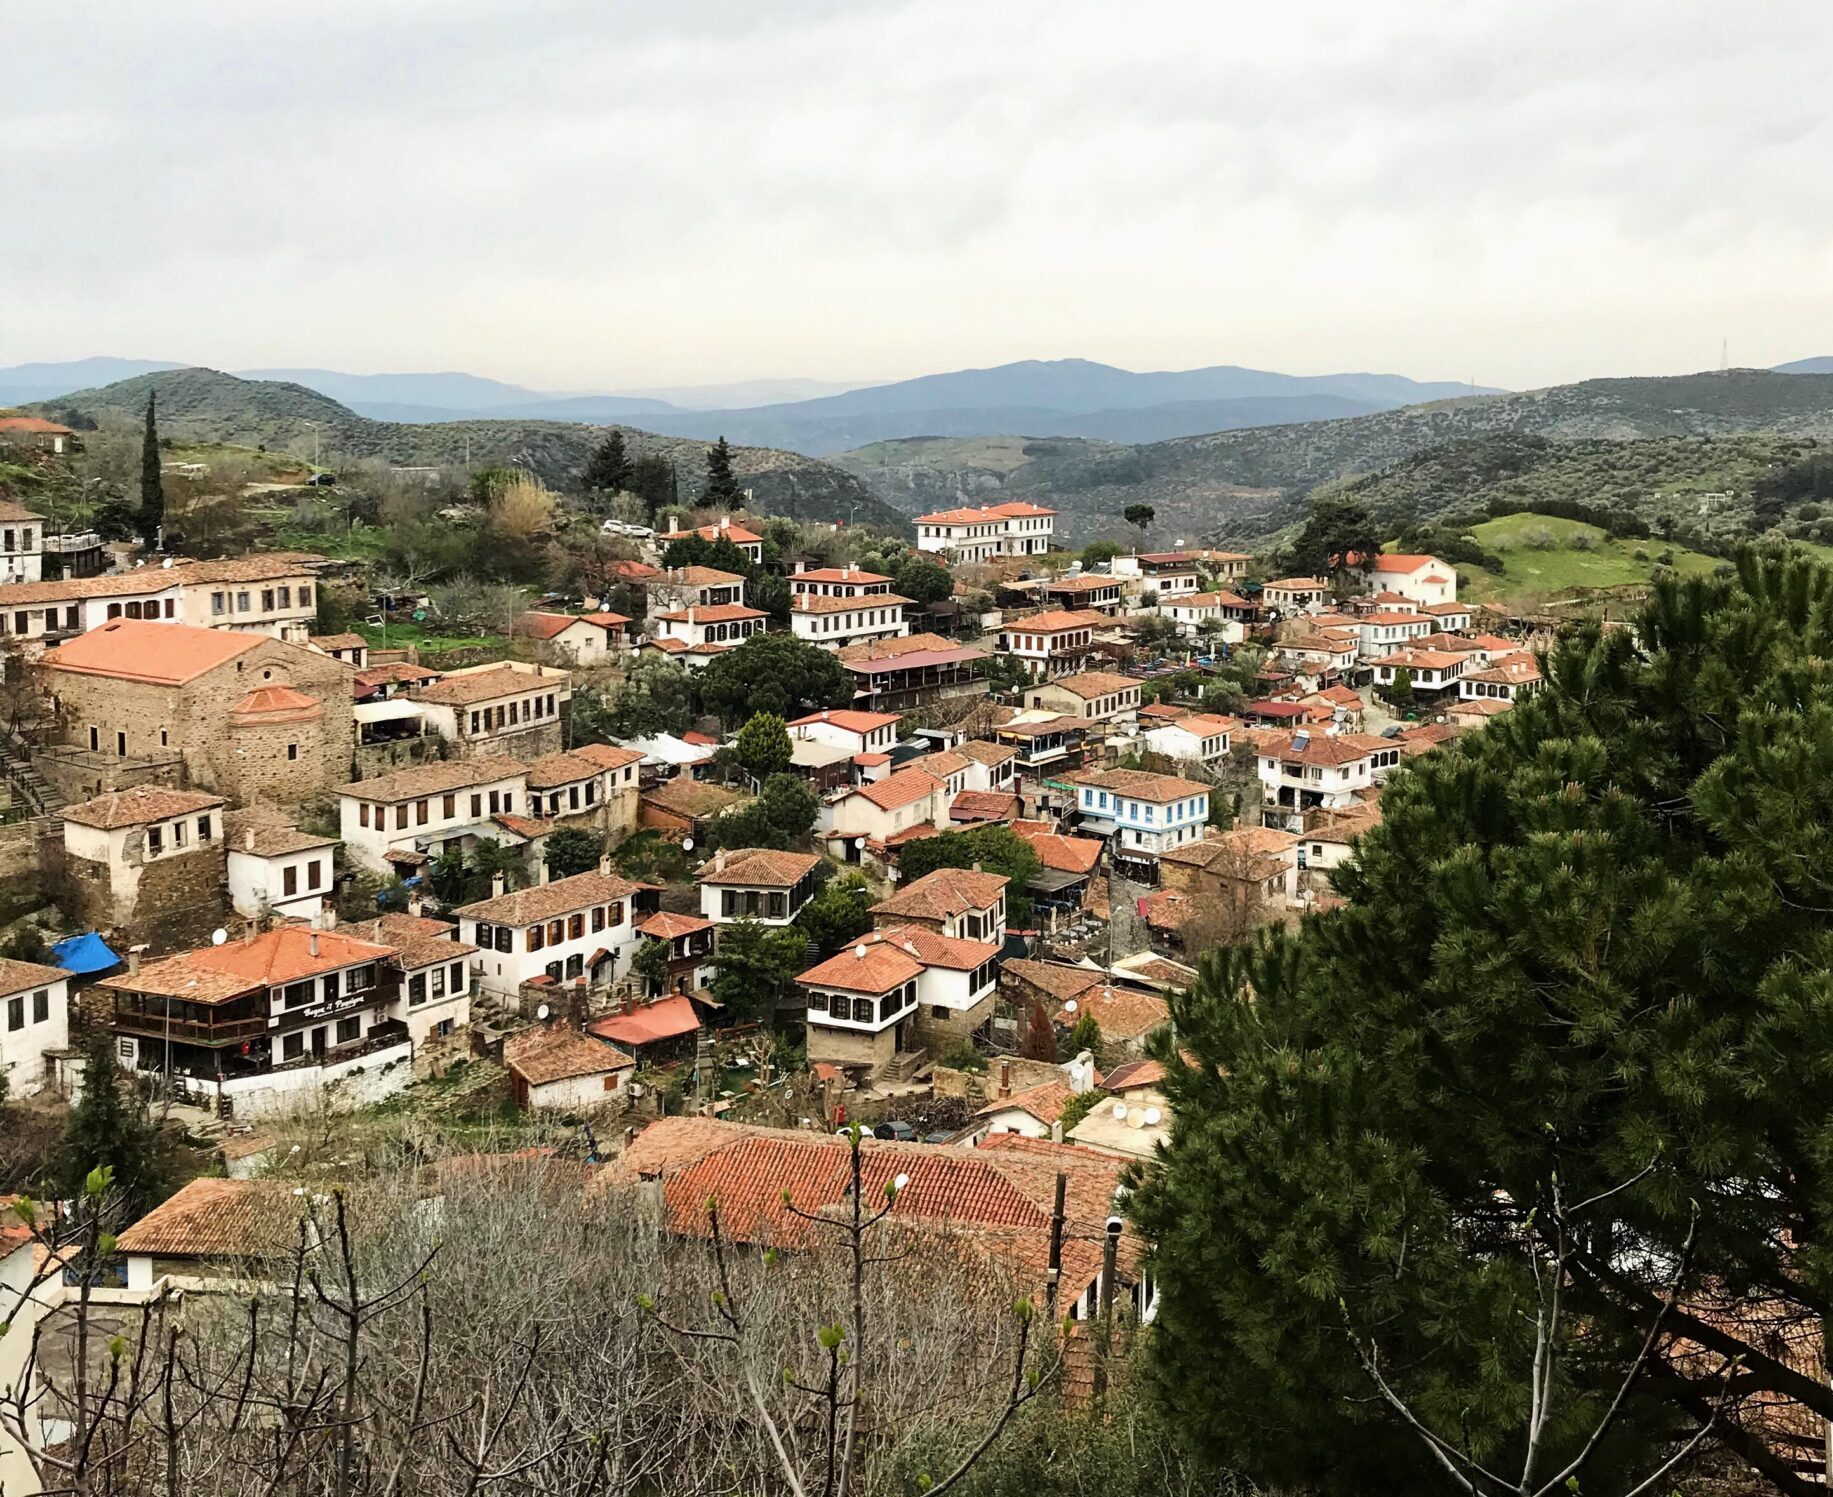 What to do in sirince village